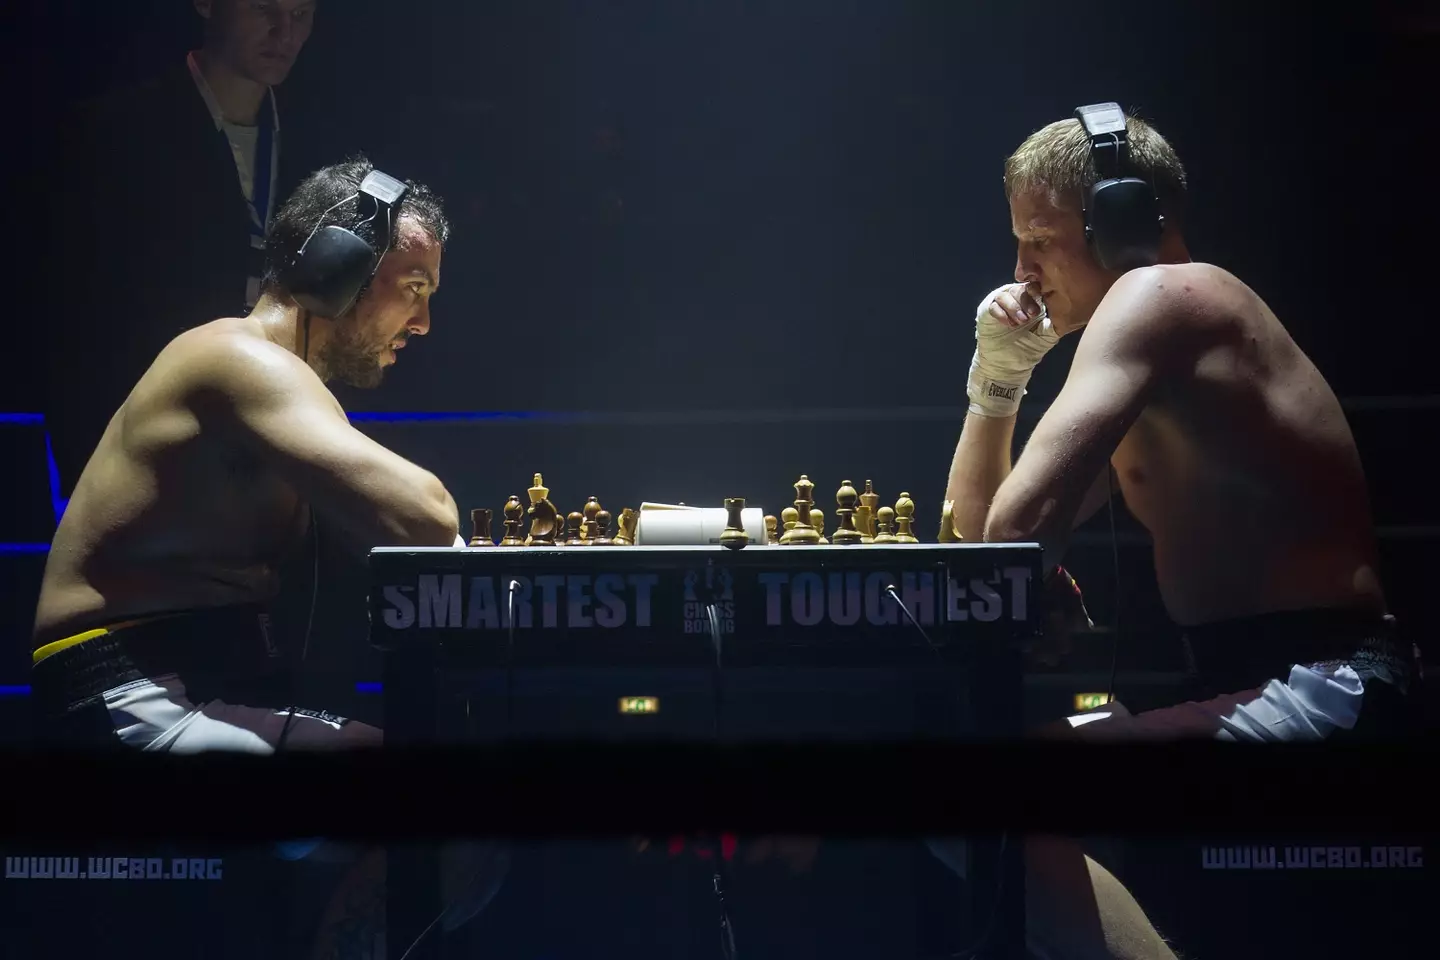 Chess and boxing?! (Target Presse Agentur Gmbh/Getty Images)